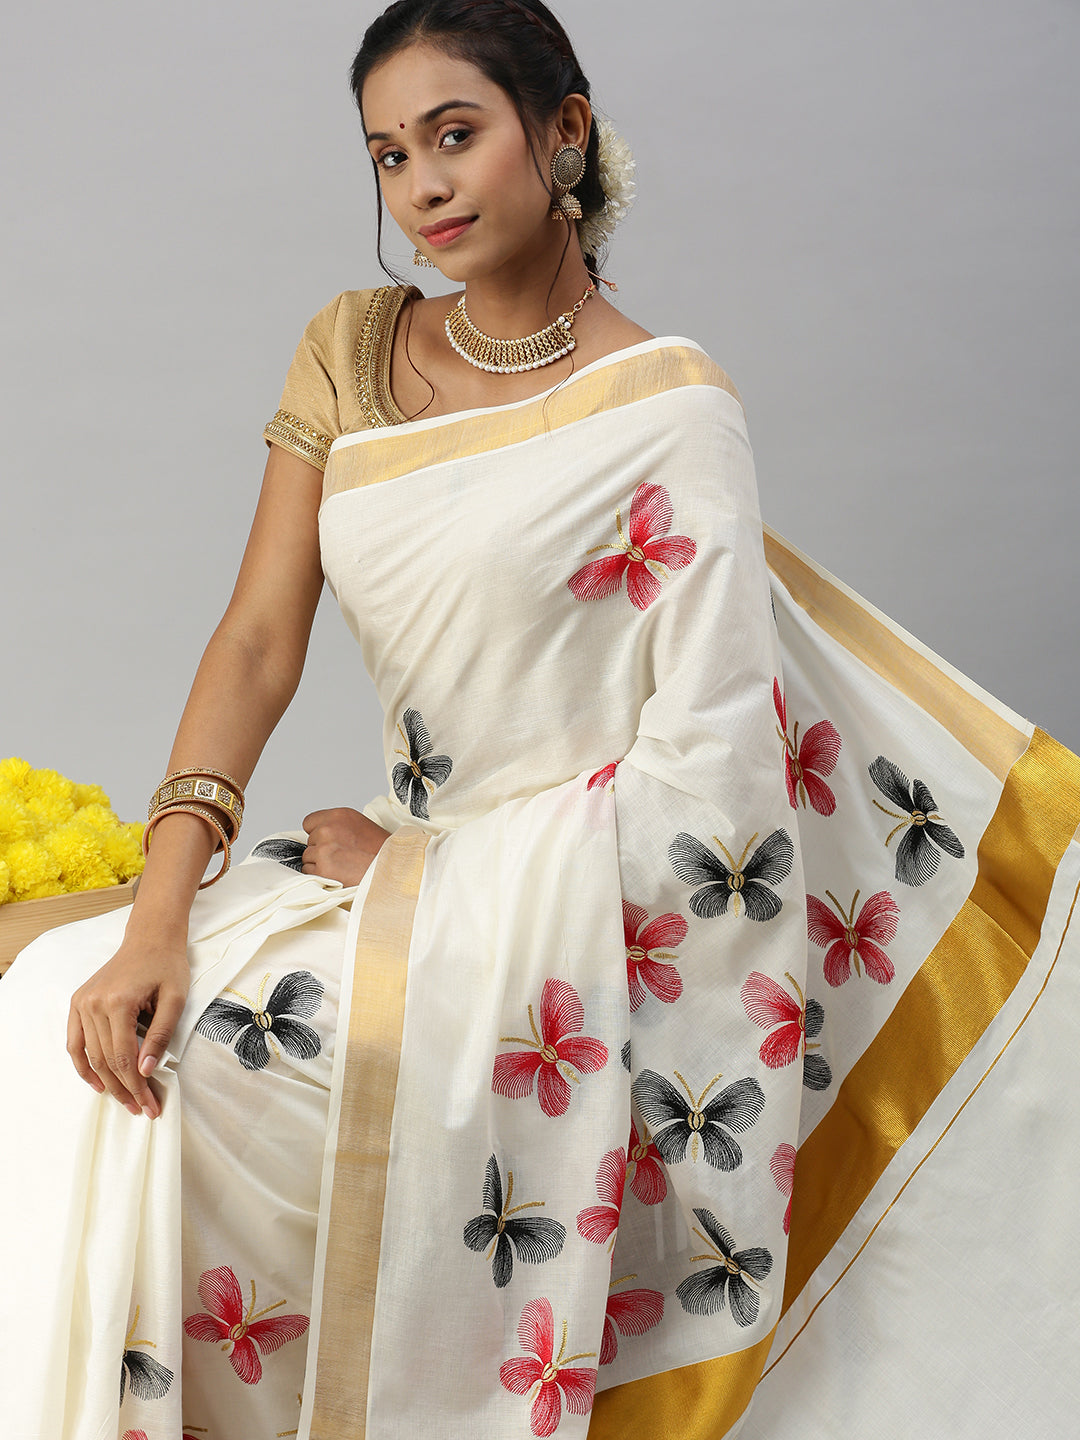 Kerala Cream Colorful Butterfly Embroidery Saree with Gold Zari Border KS83-Side view